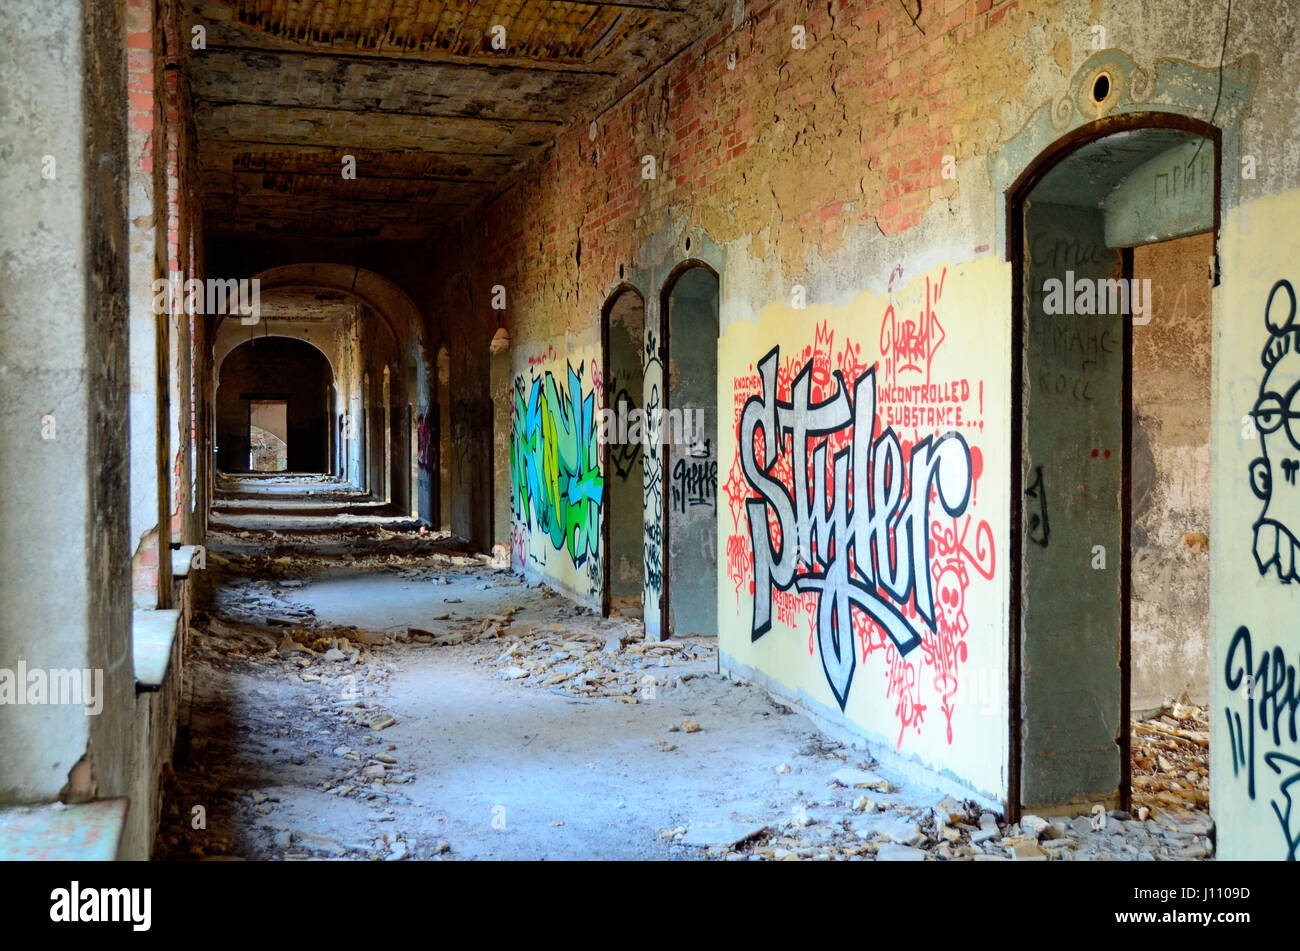 Grafiti and tags in an abandoned building Stock Photo